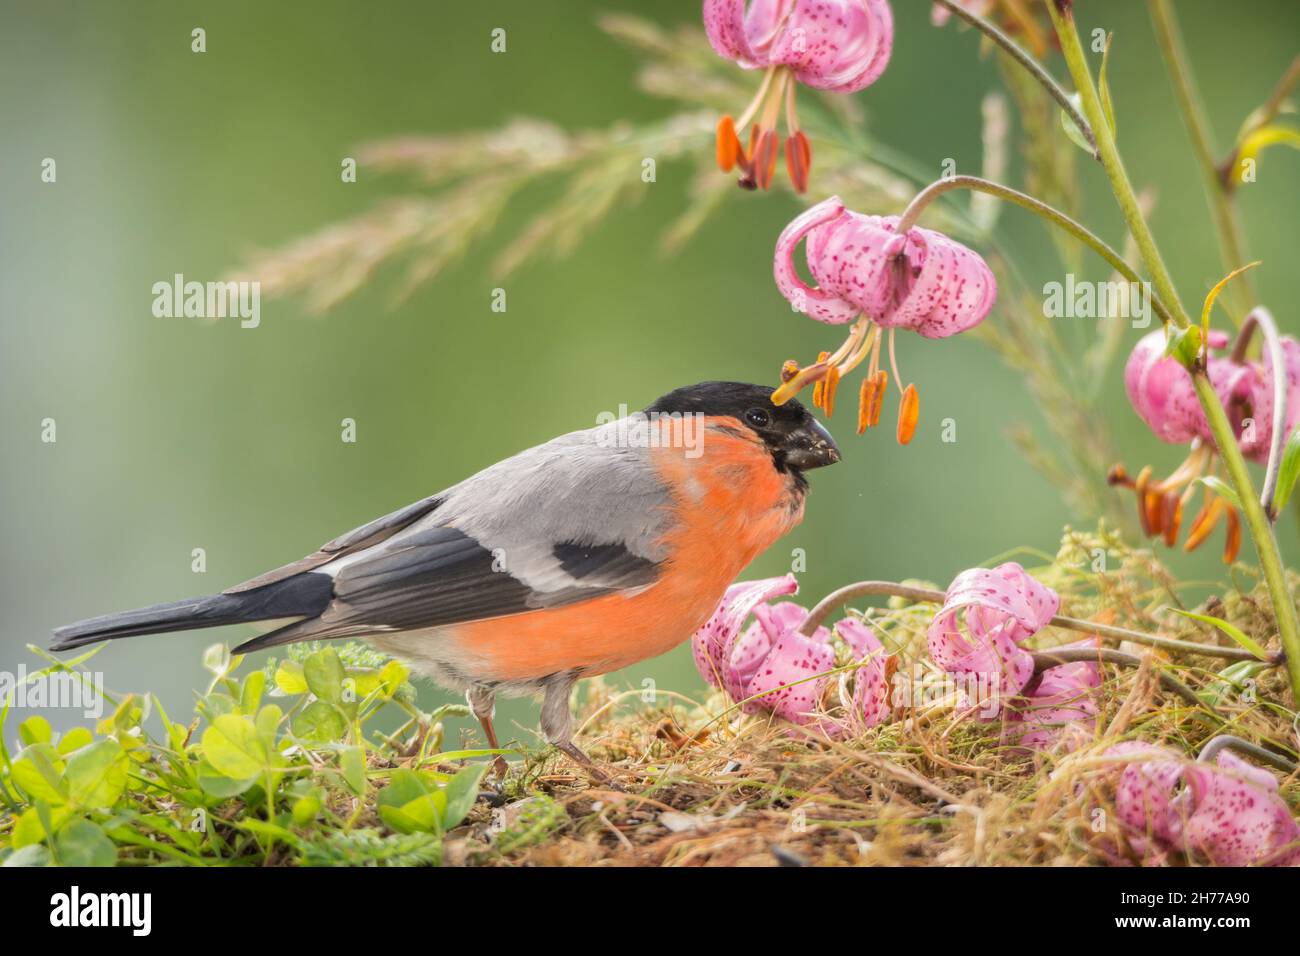 male bullfinch standing with flowers Stock Photo